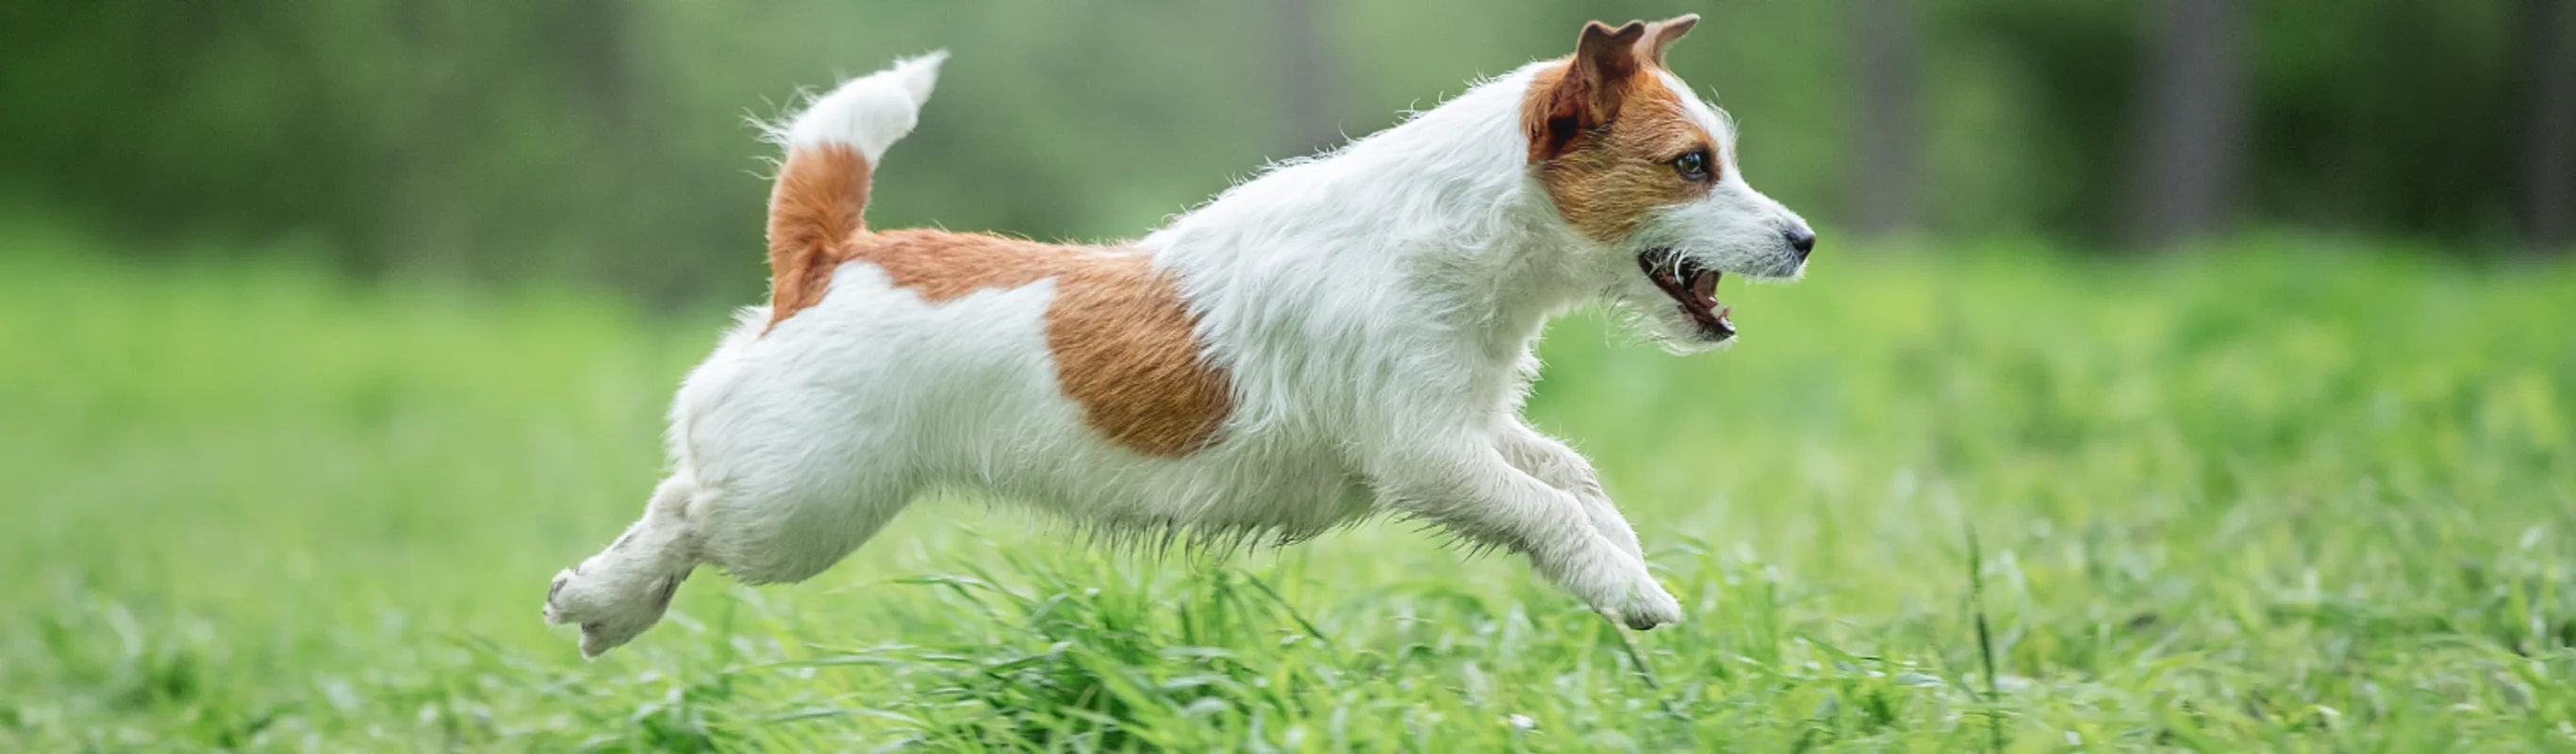 dog leaping through grass